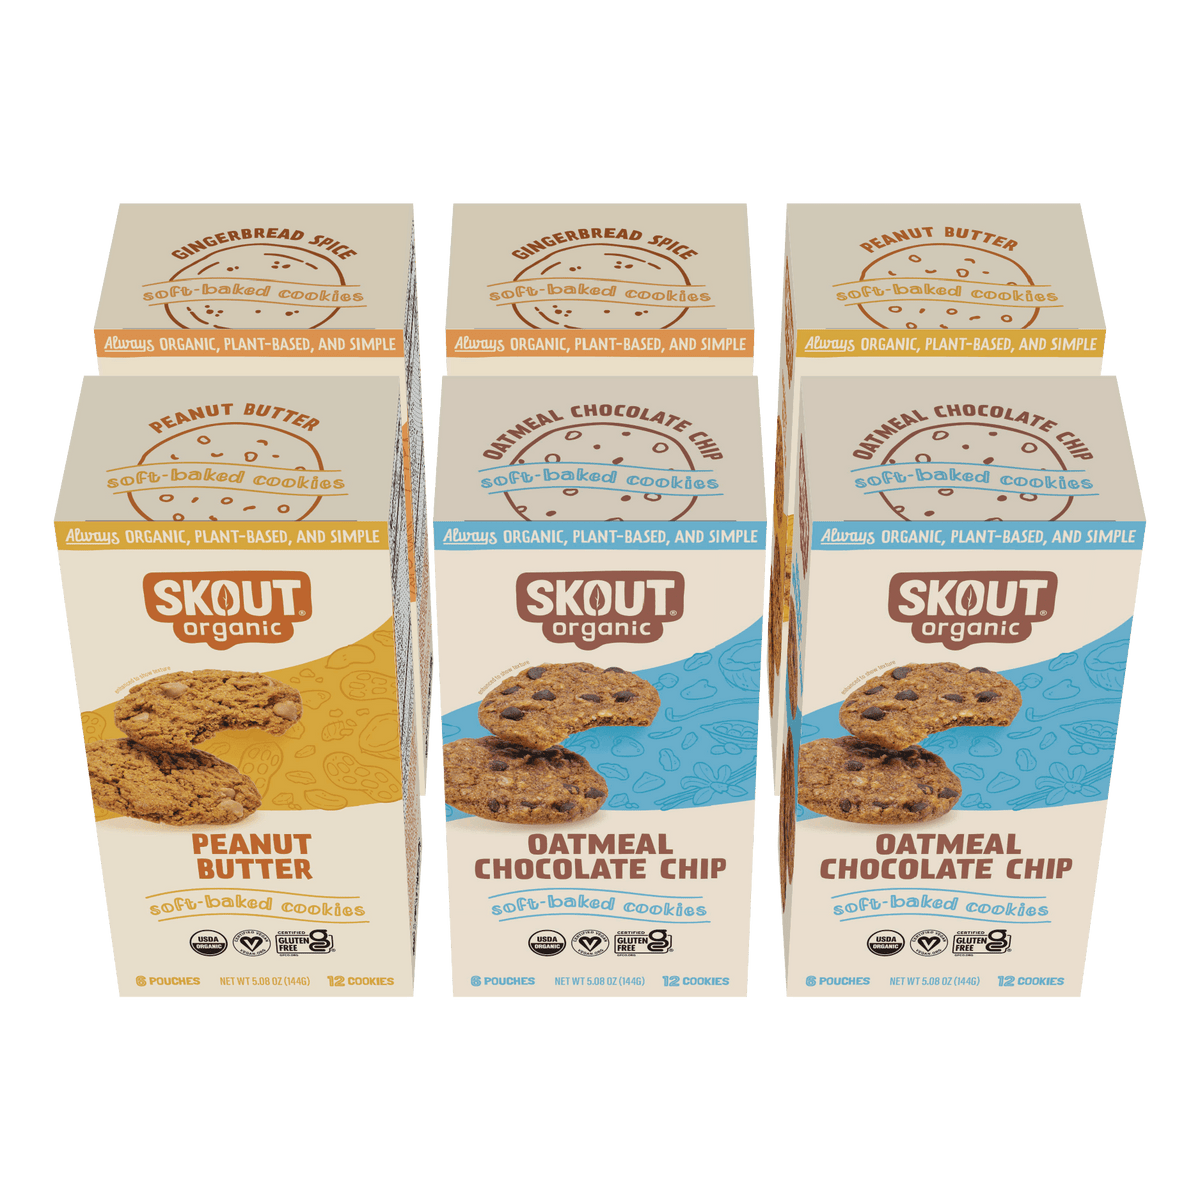 Skout Organic Soft Baked Cookie Build A Box - 6 Pack